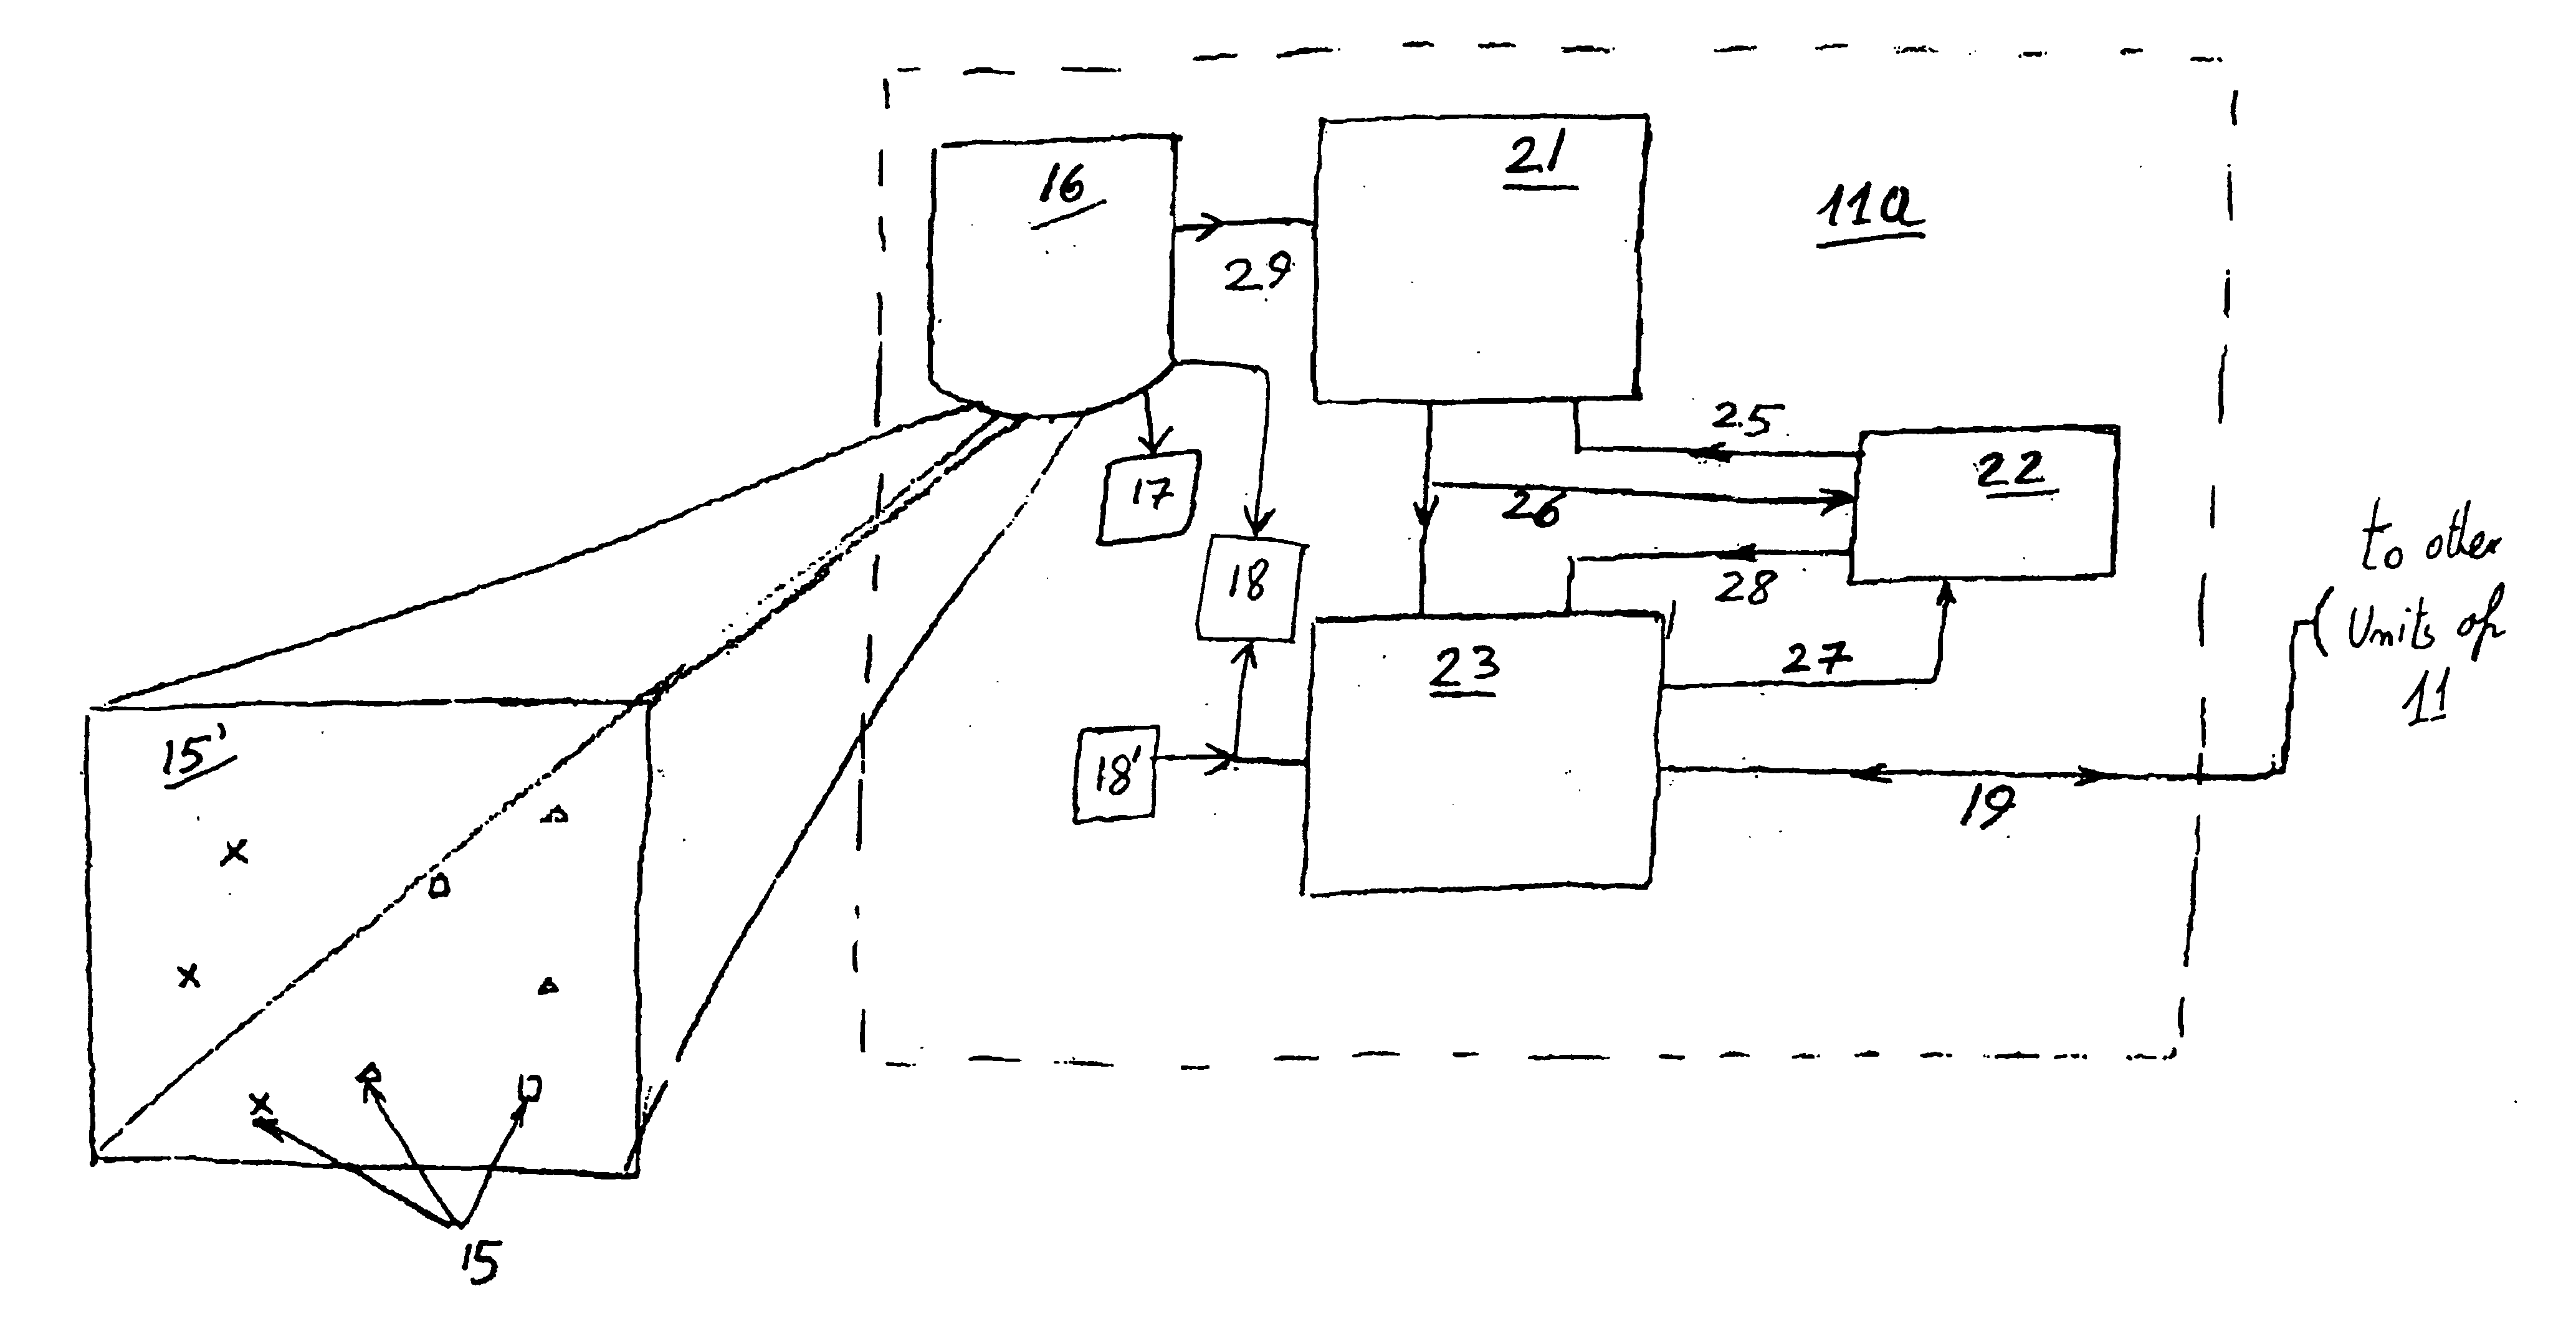 Method and system for improving situational awareness of command and control units